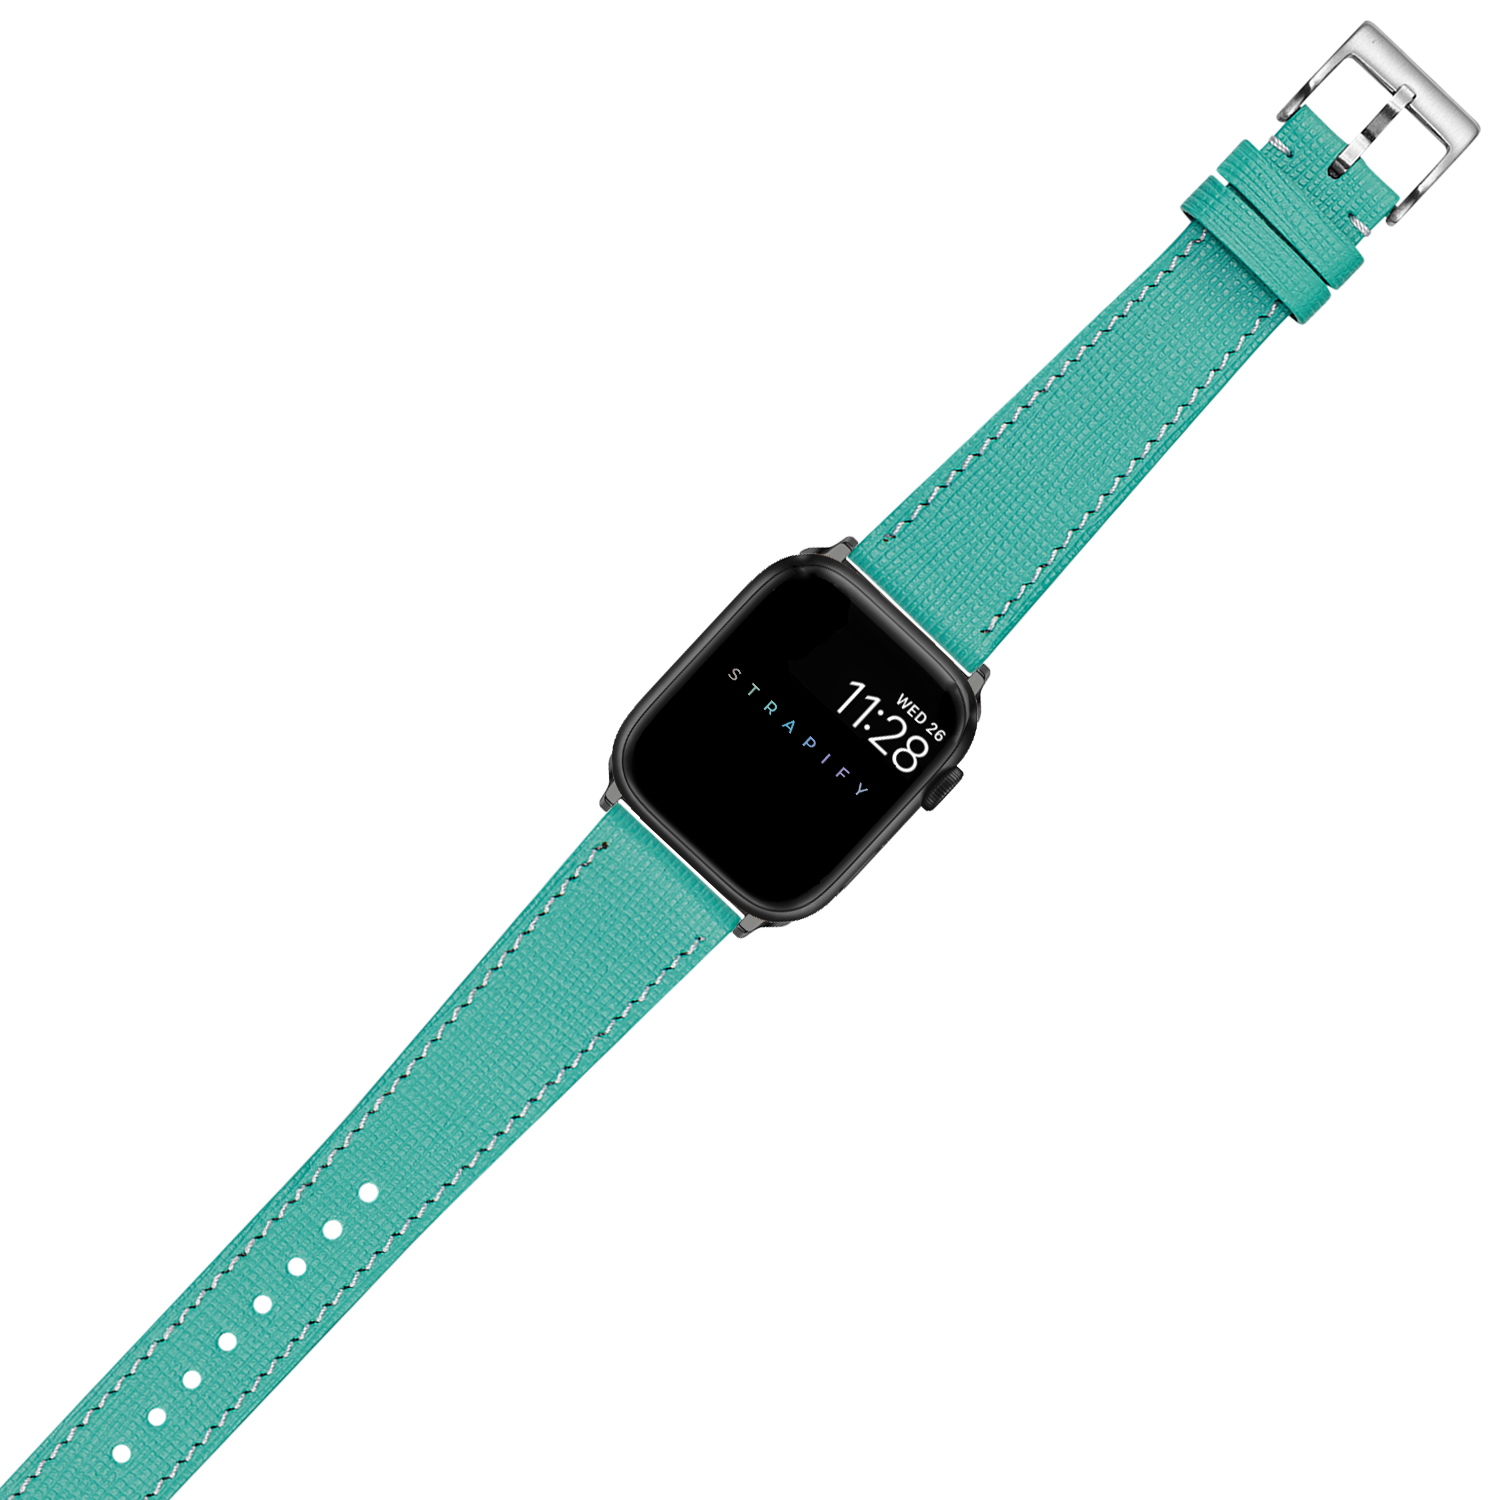 [Apple Watch] Chevre Saffiano Leather - Tiffany Blue with White Stitching